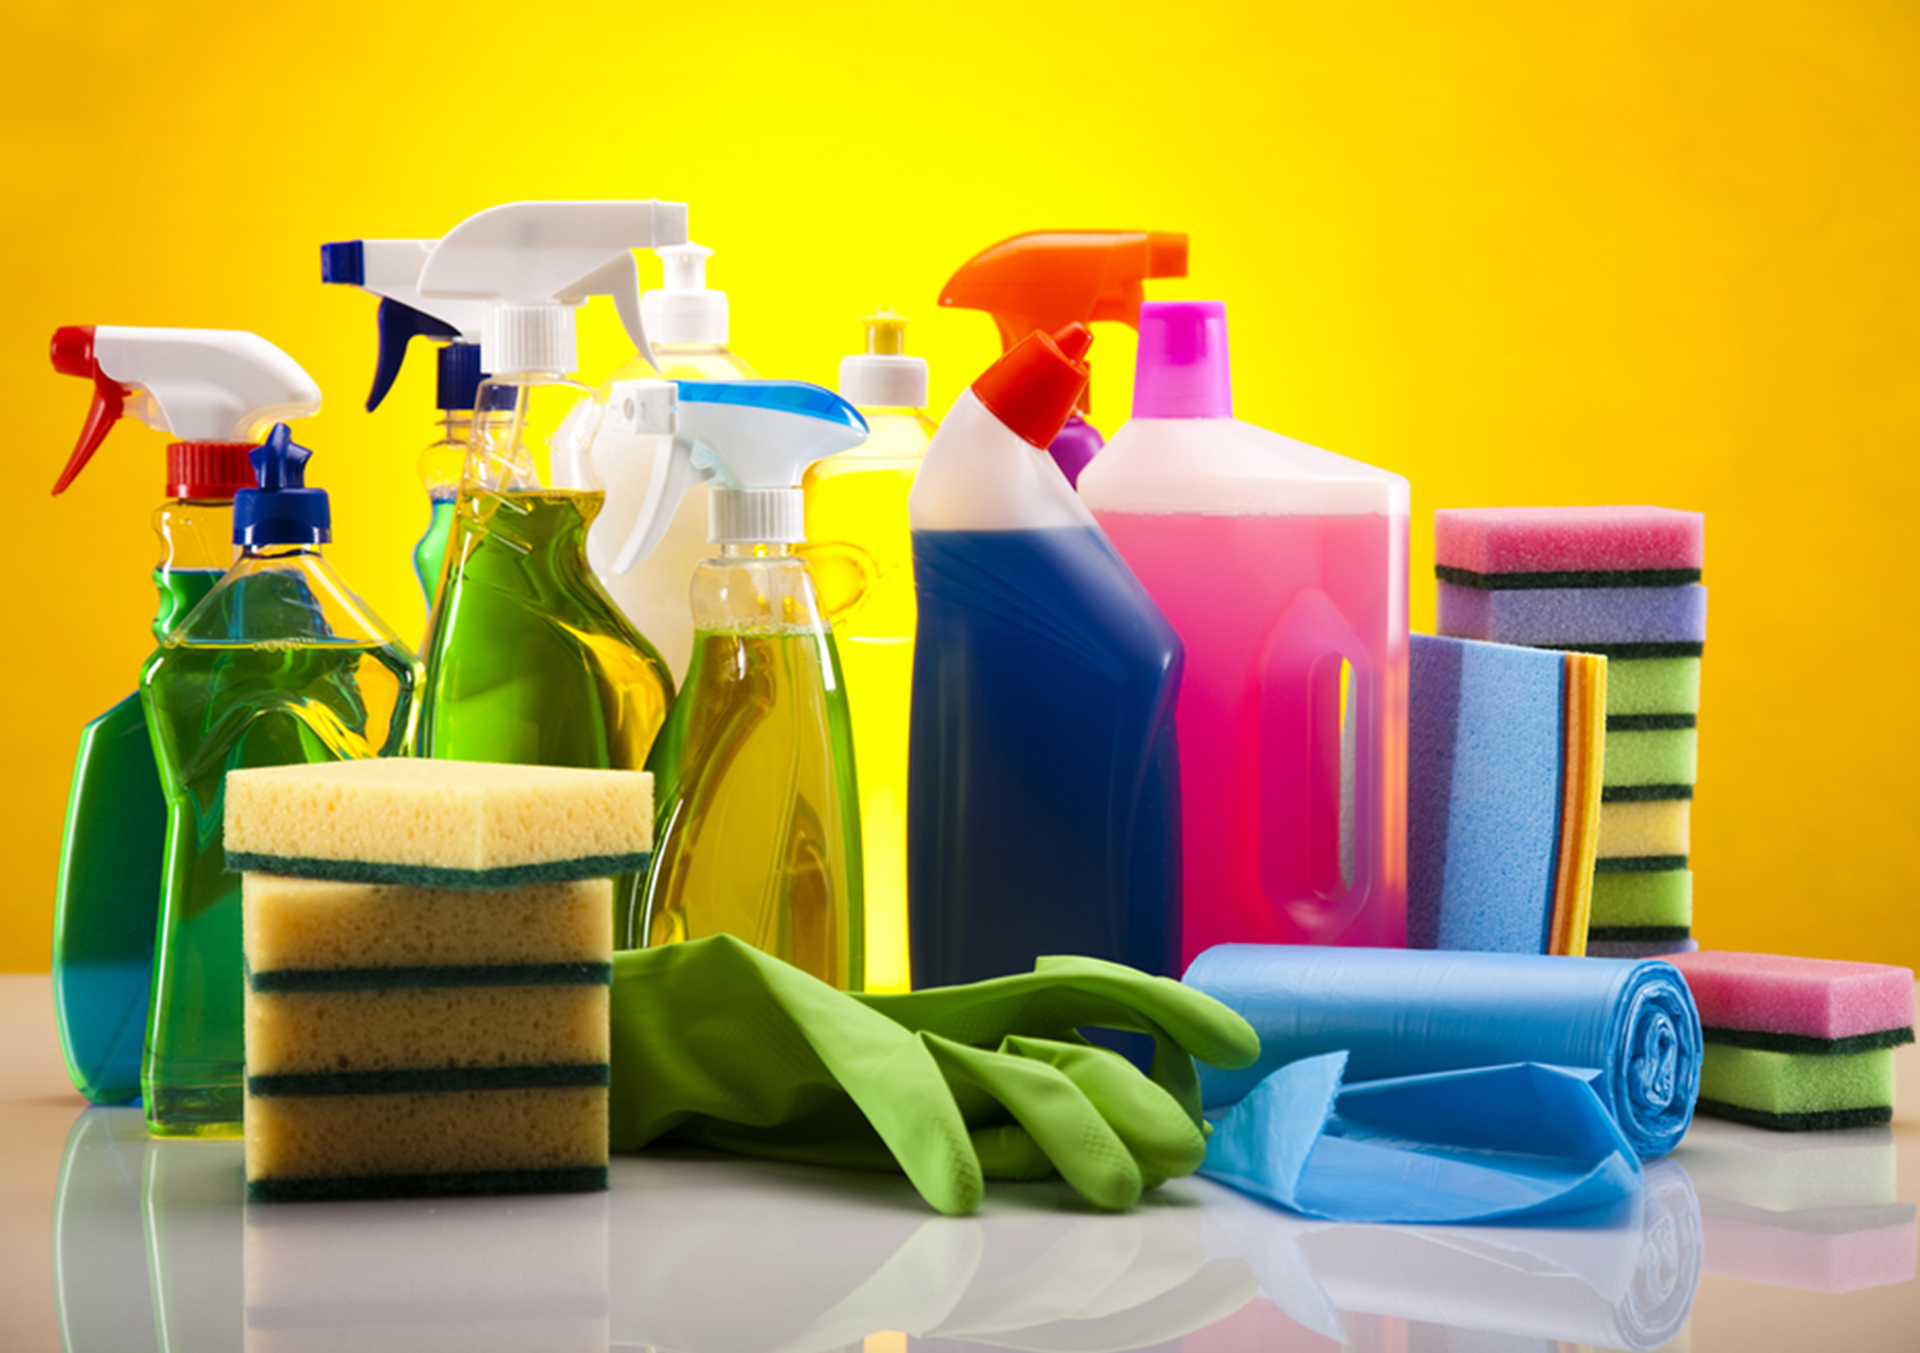 “Cleaning Essentials: Must-Have Supplies for a Tidy Home”